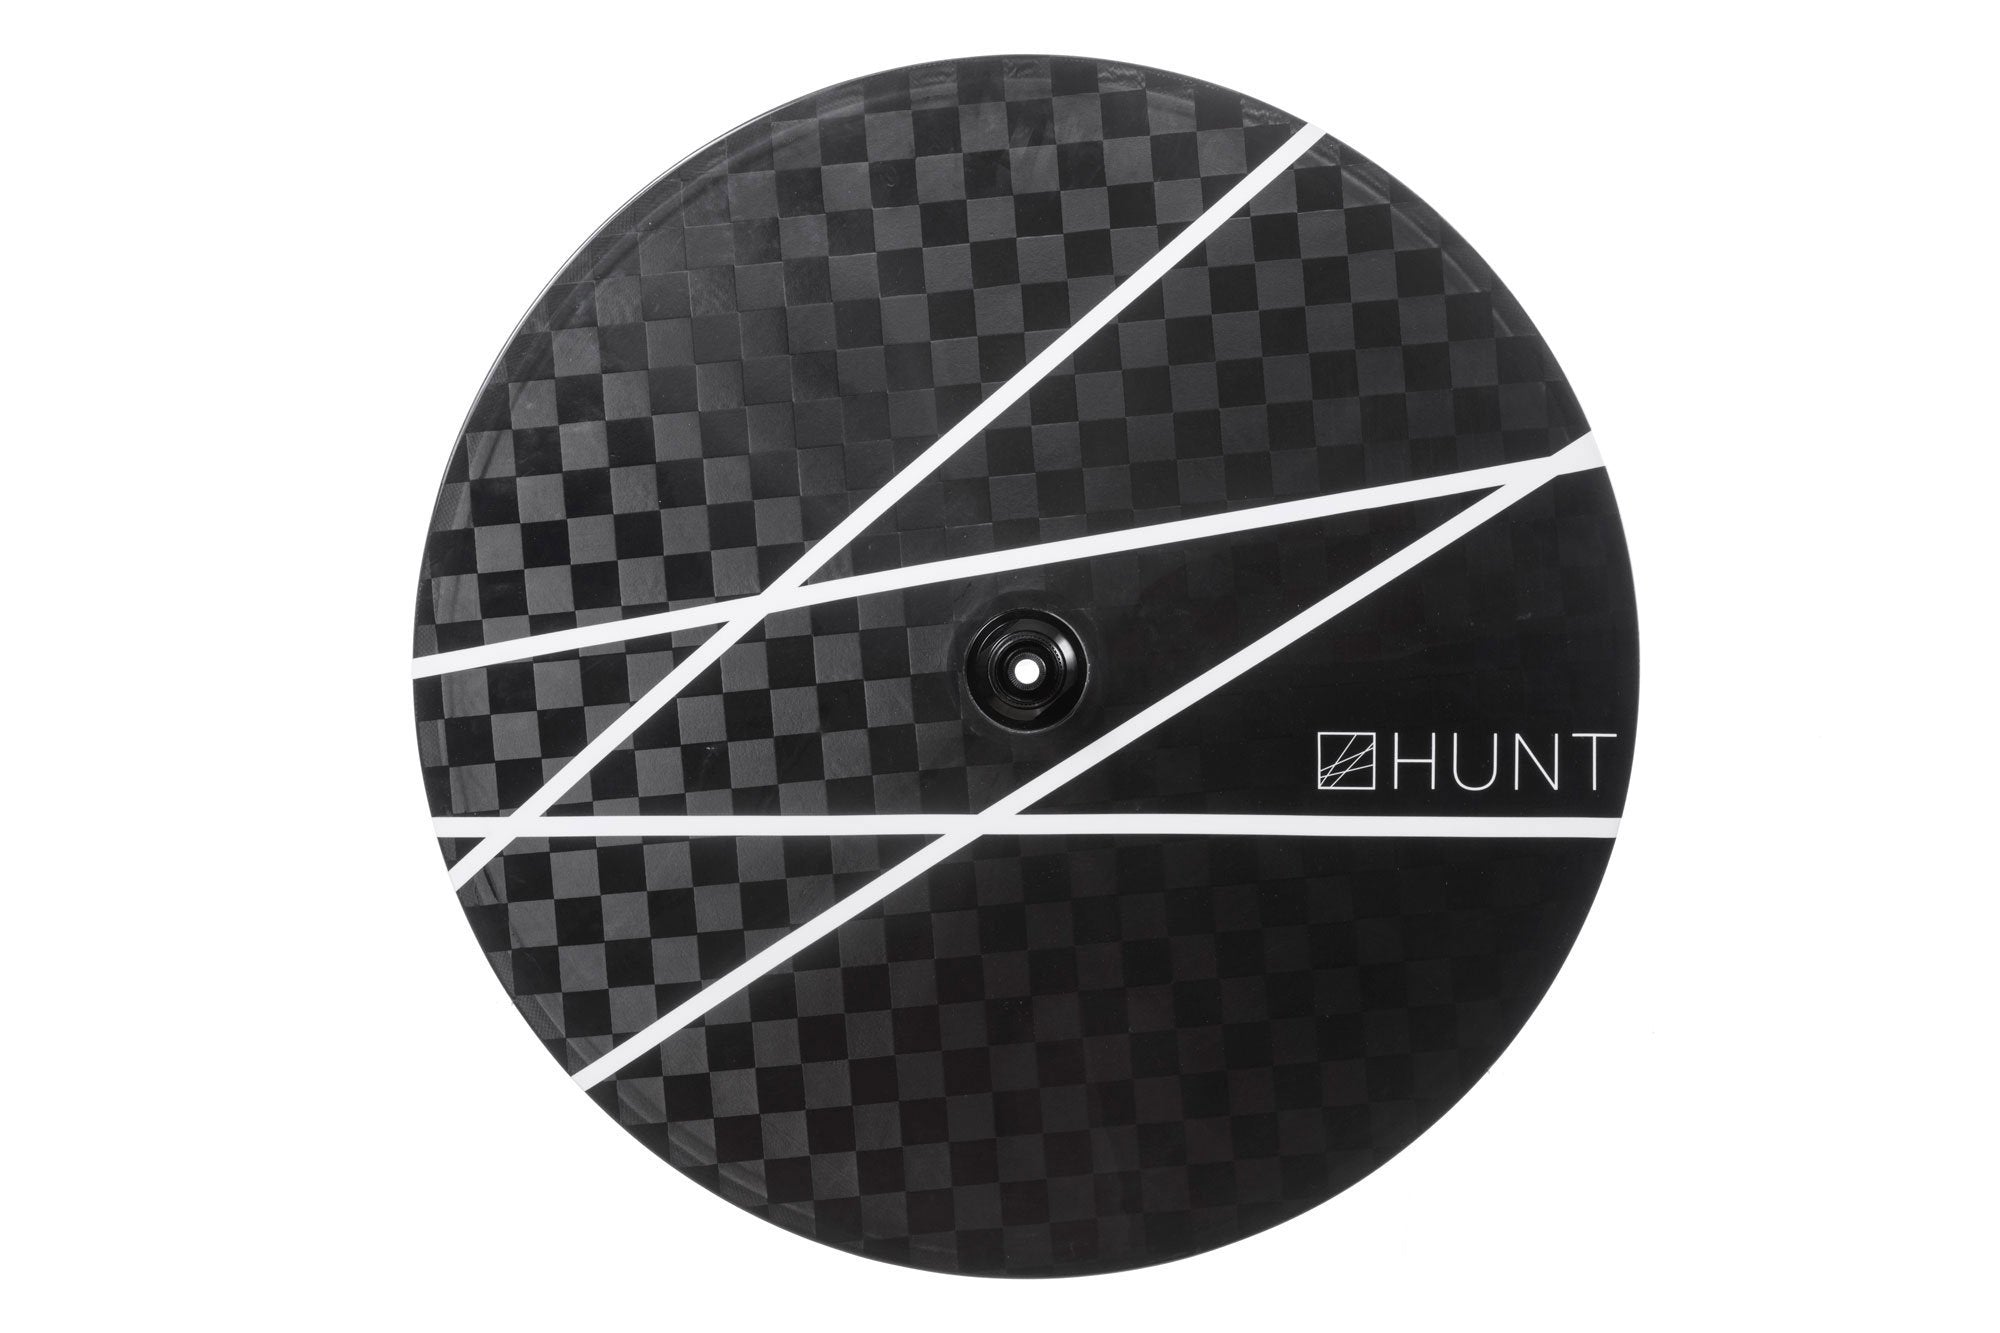 <h1>TT Disc Rim</h1><i>Full rear TT Disc wheel built for speed. The rim profile is disc specific which allows higher strength to weight as no reinforcement is required for a braking surface. 19mm internal, delivering superior aerodynamic performances with a 25-28c tubeless tire, but also very capable with a 23c. Also works excellently with clincher tires and tubes</i>